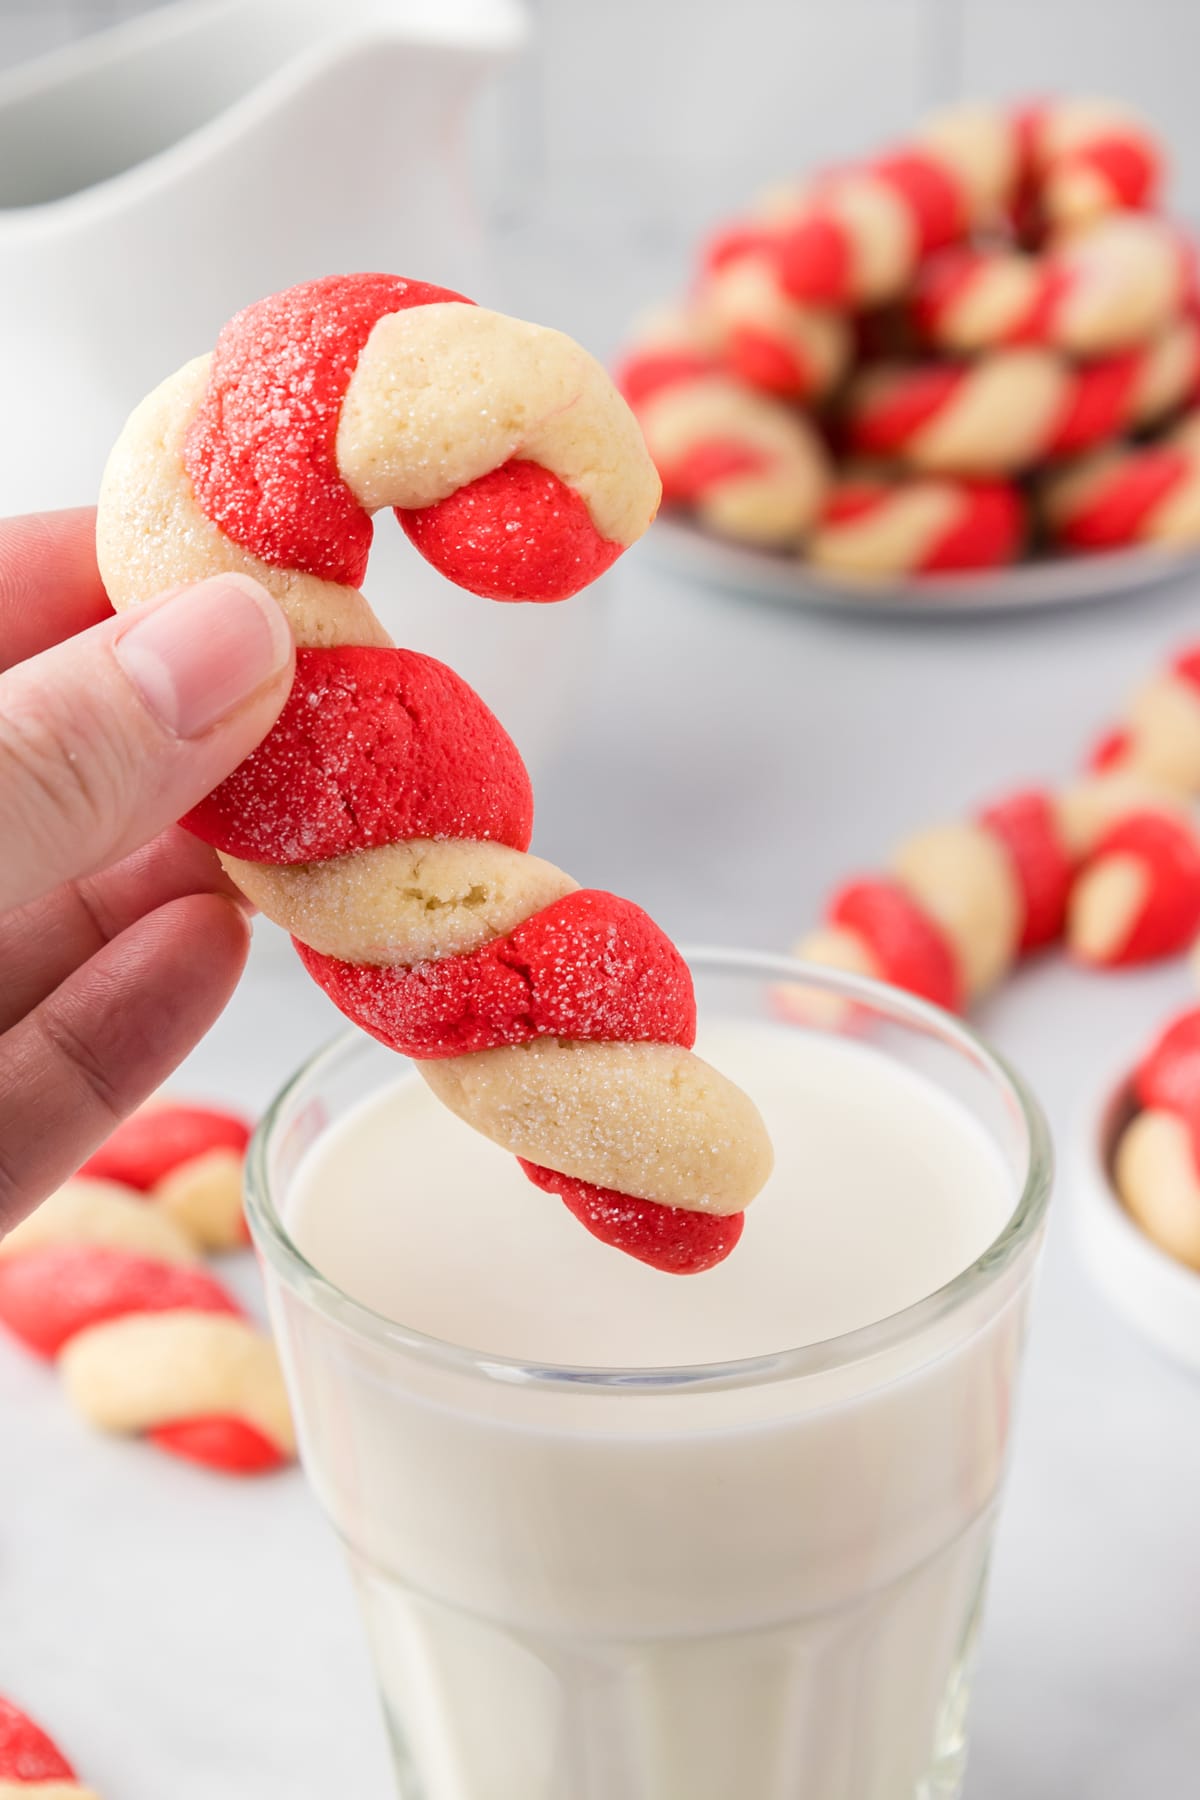 Candy Cande SHaped Cookies about to be dunked in a glass of milk.